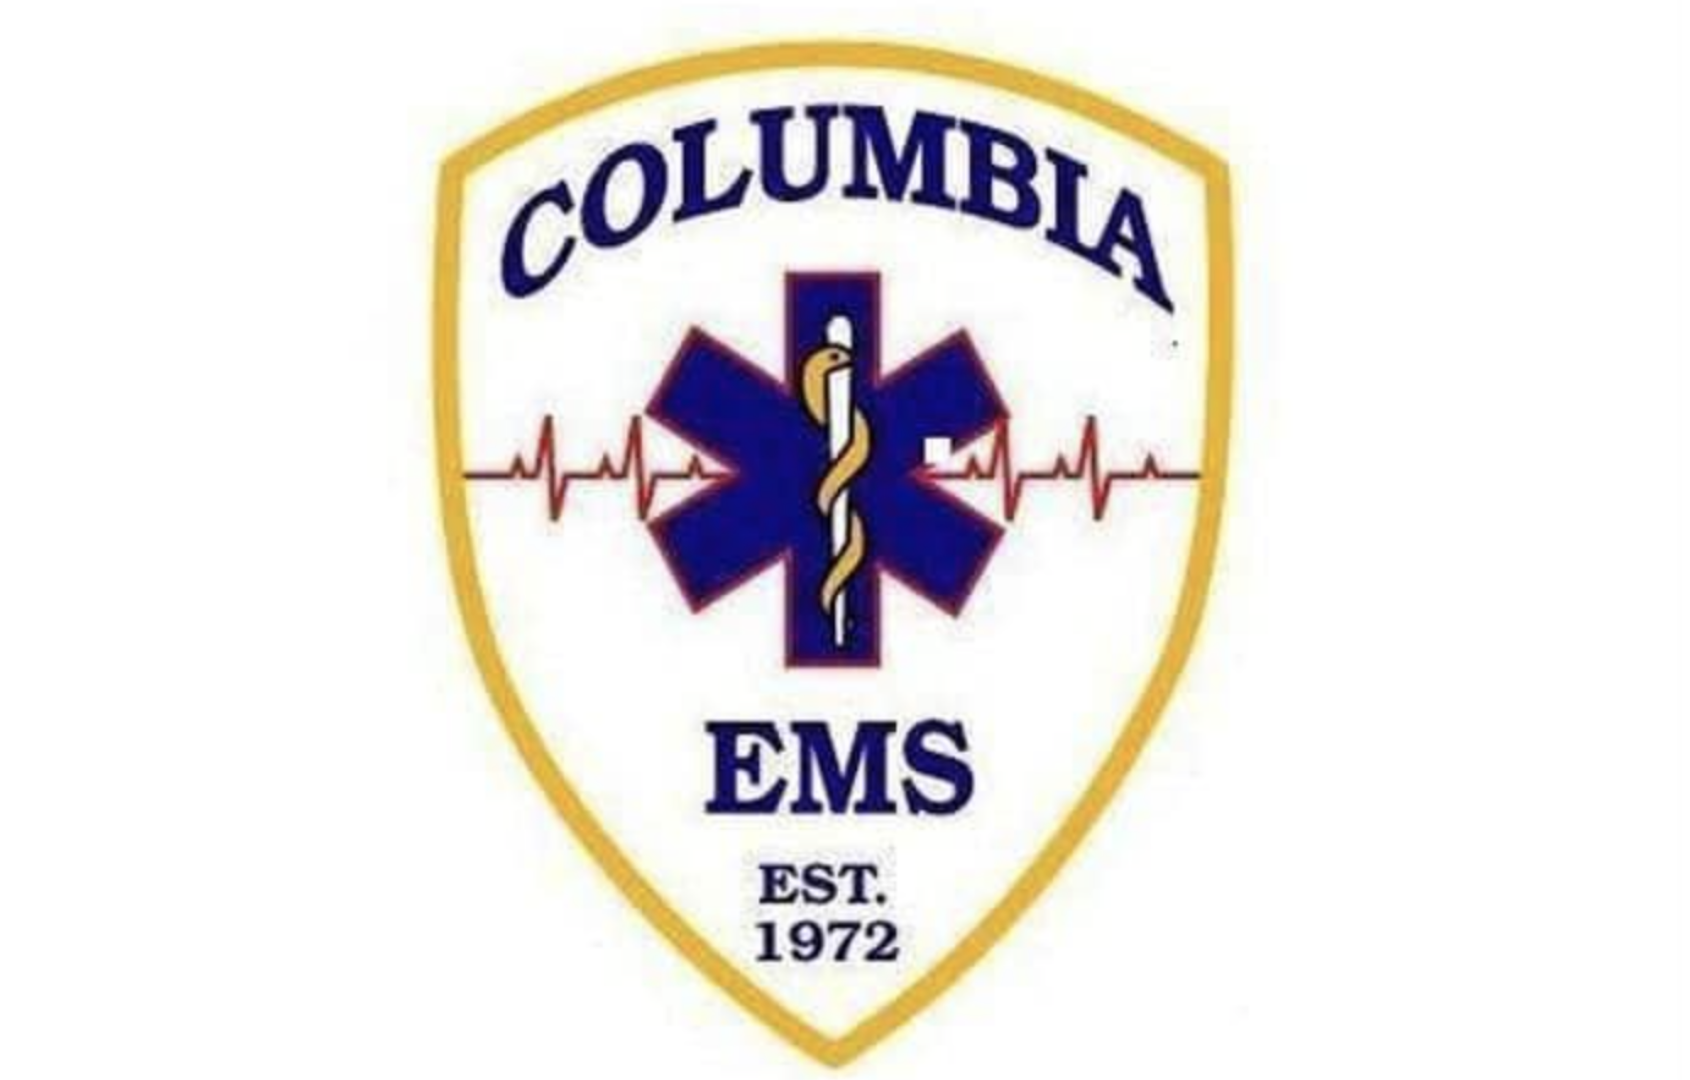 Columbia EMS FEAT